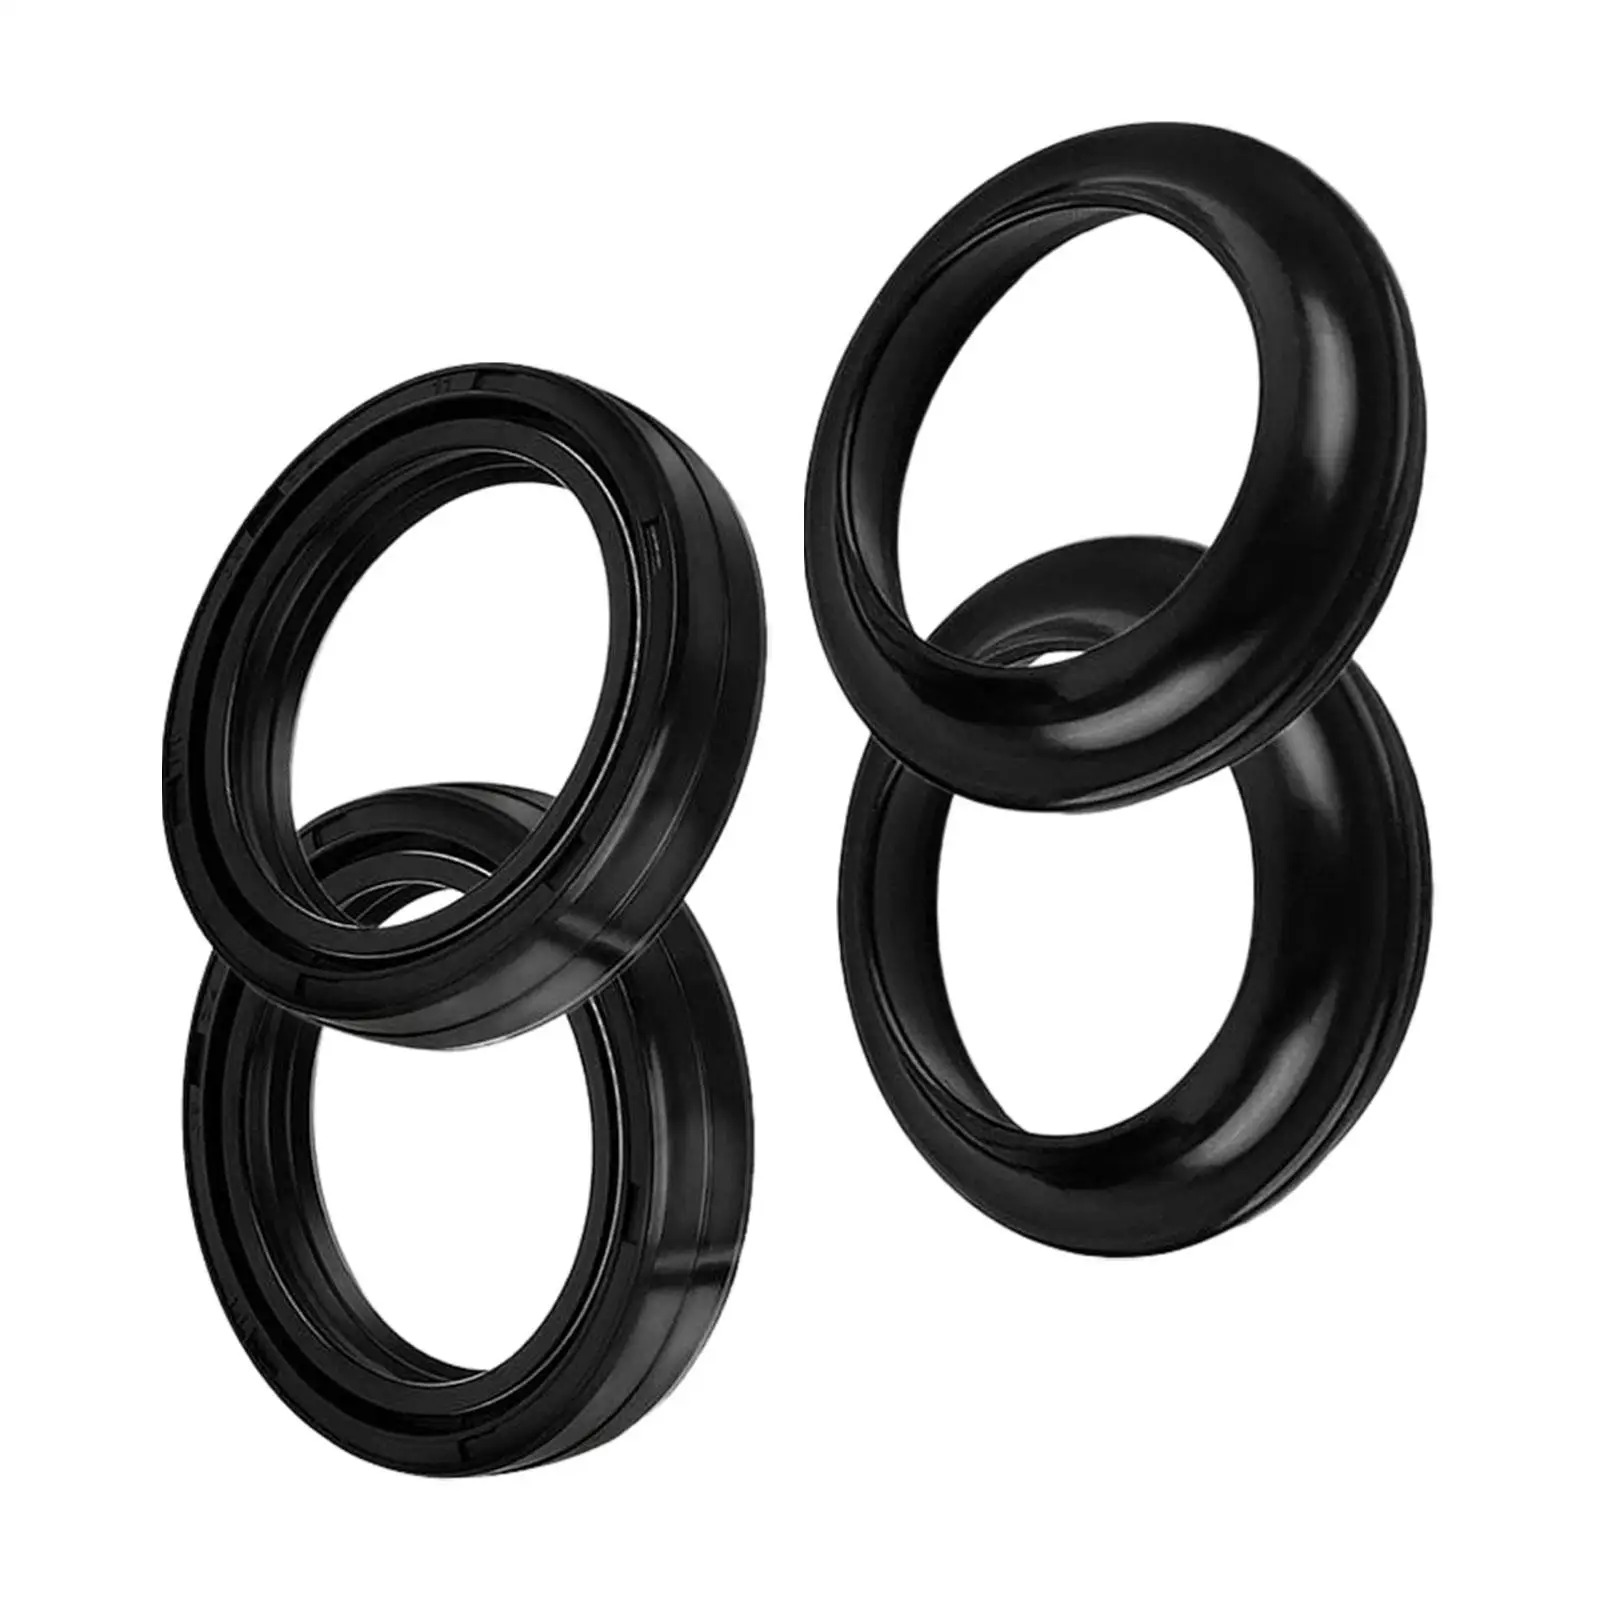 4Pcs Front Fork Oil Seal and Dust Seal 39x52x11mm for Harley XL883N